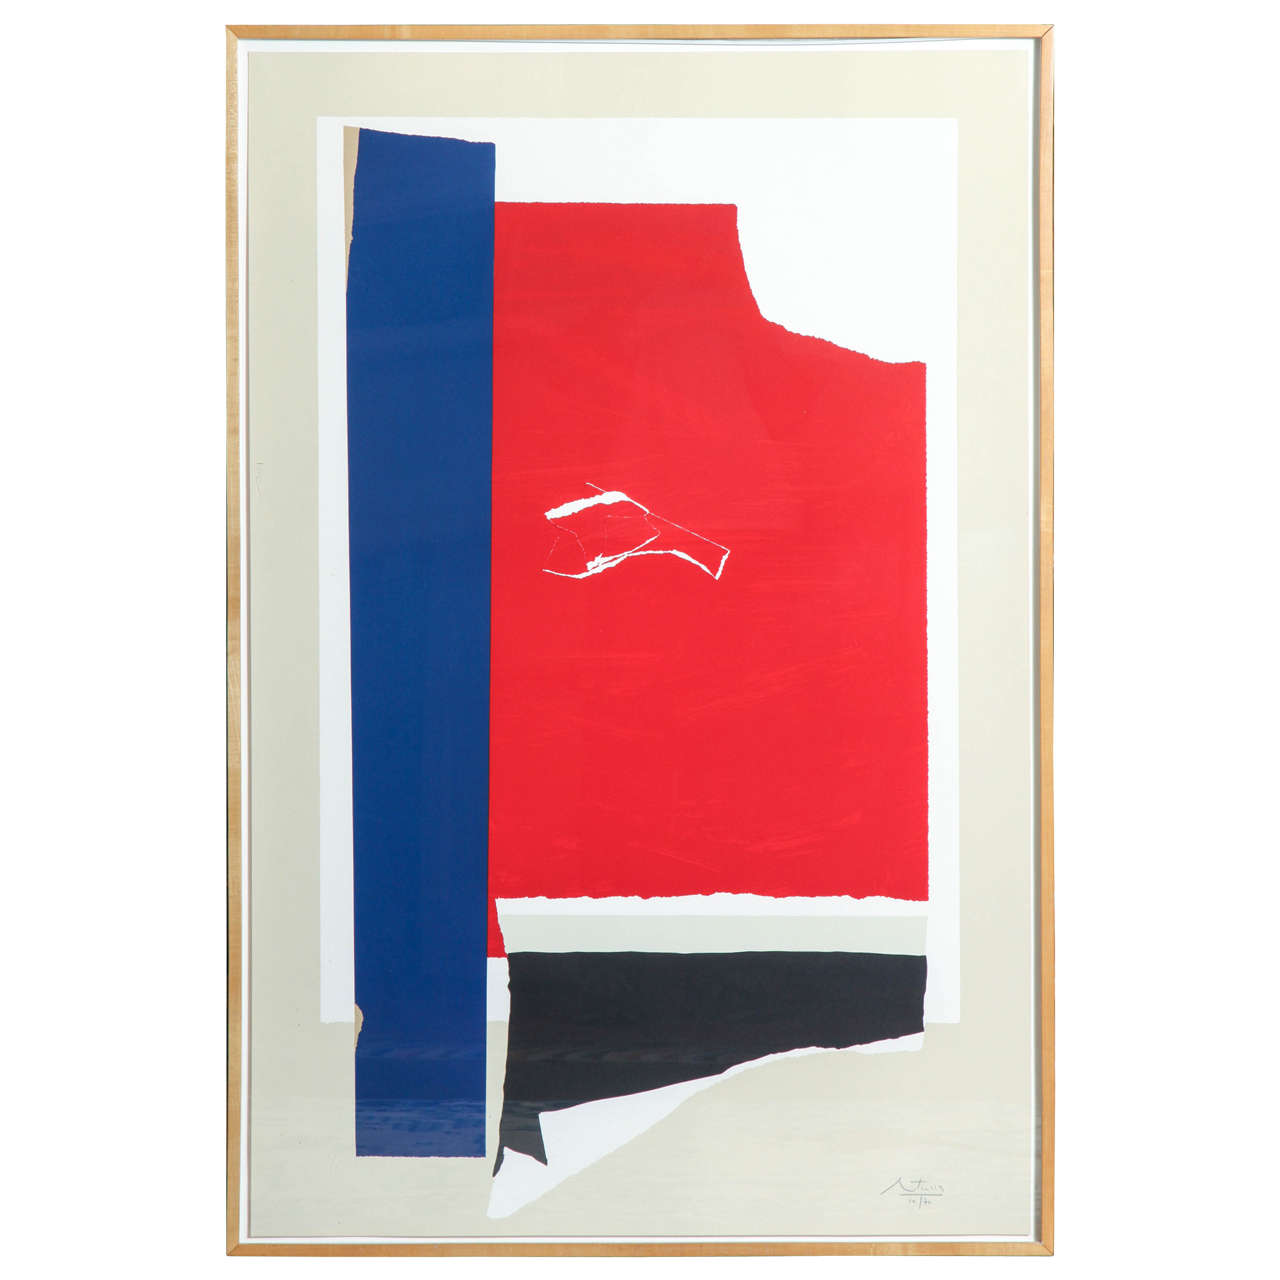 Robert Motherwell "On The Wing" Lithograph For Sale